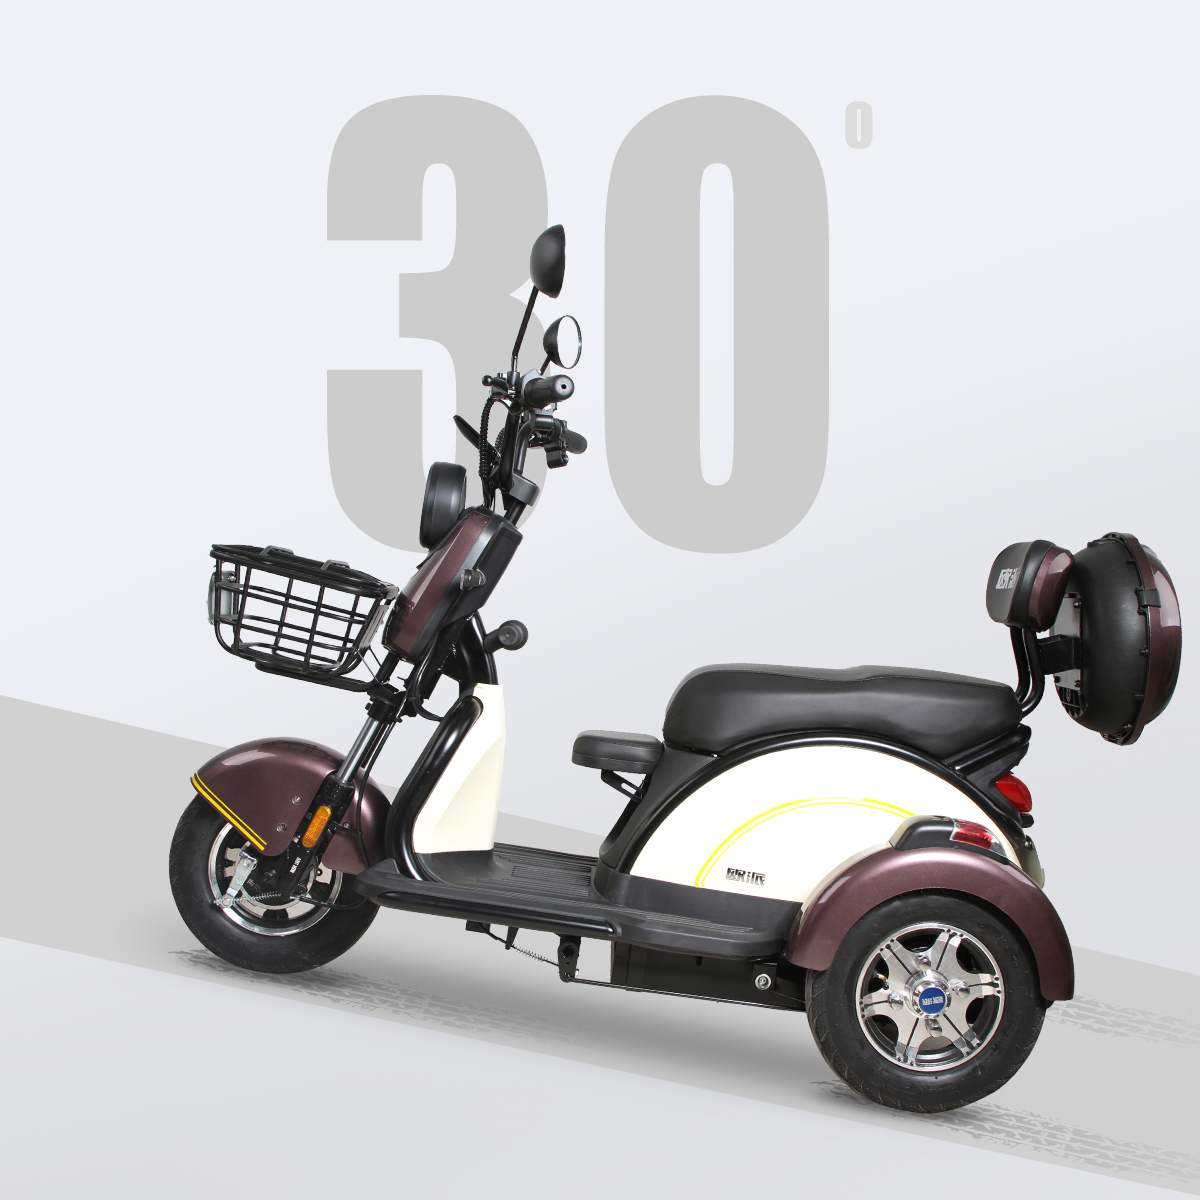 Cyclemix Product Electric Tricycle JKC2 Details 4